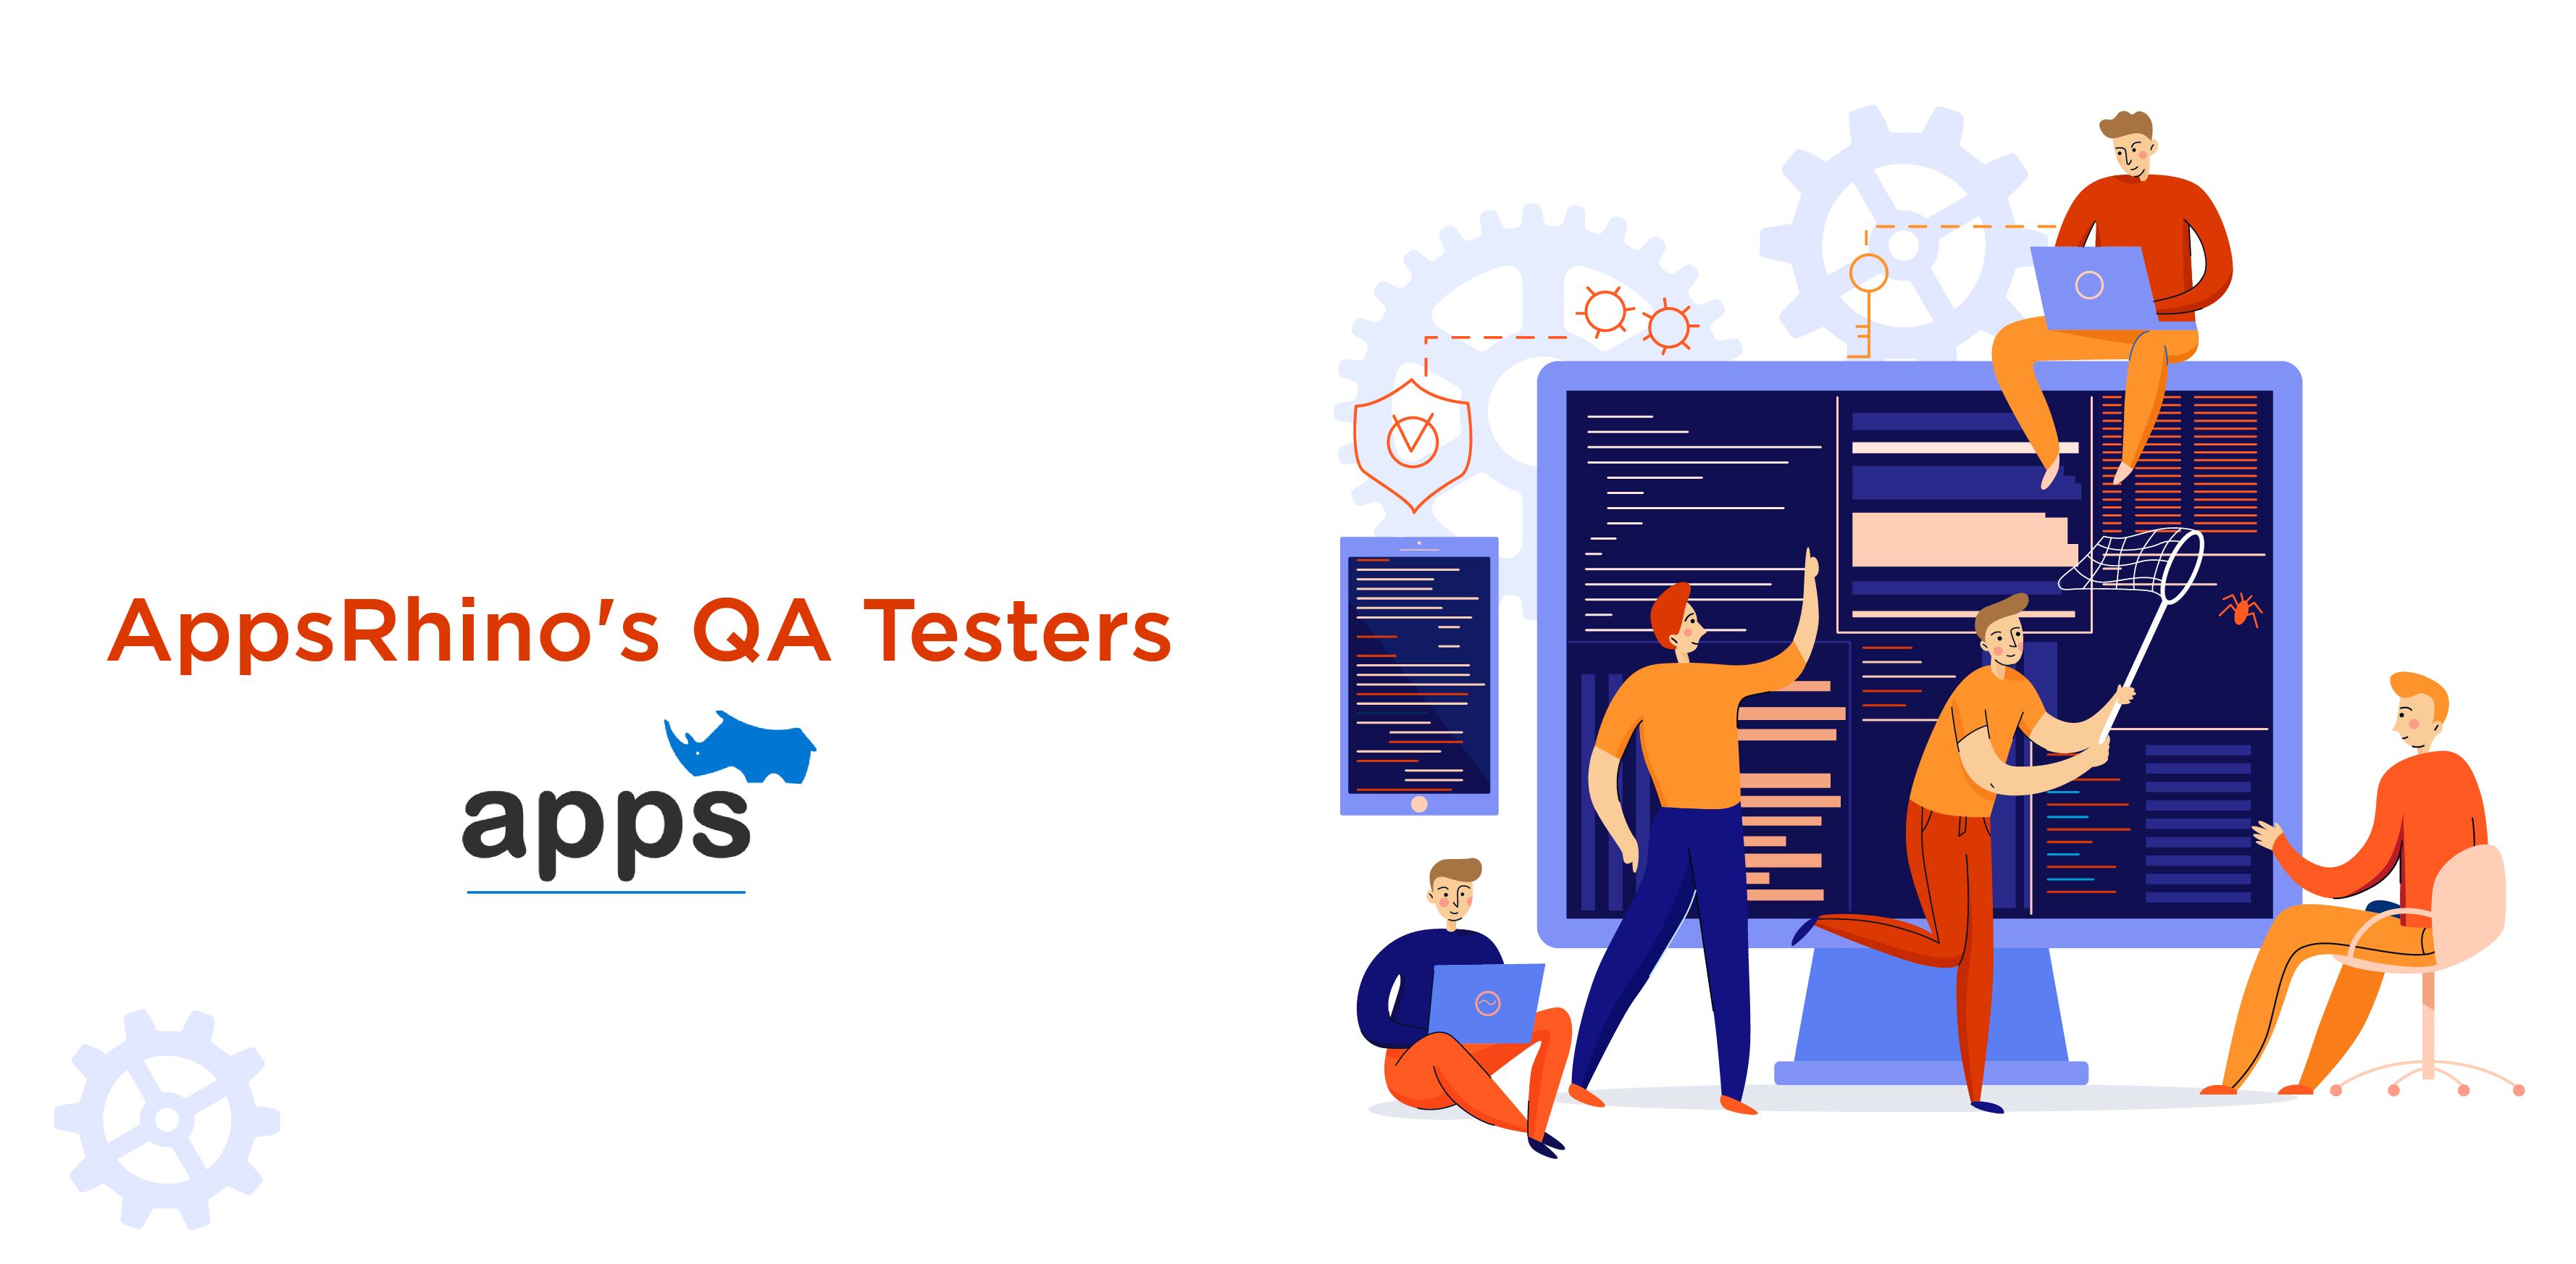 Why Hire AppsRhino's QA Testers?